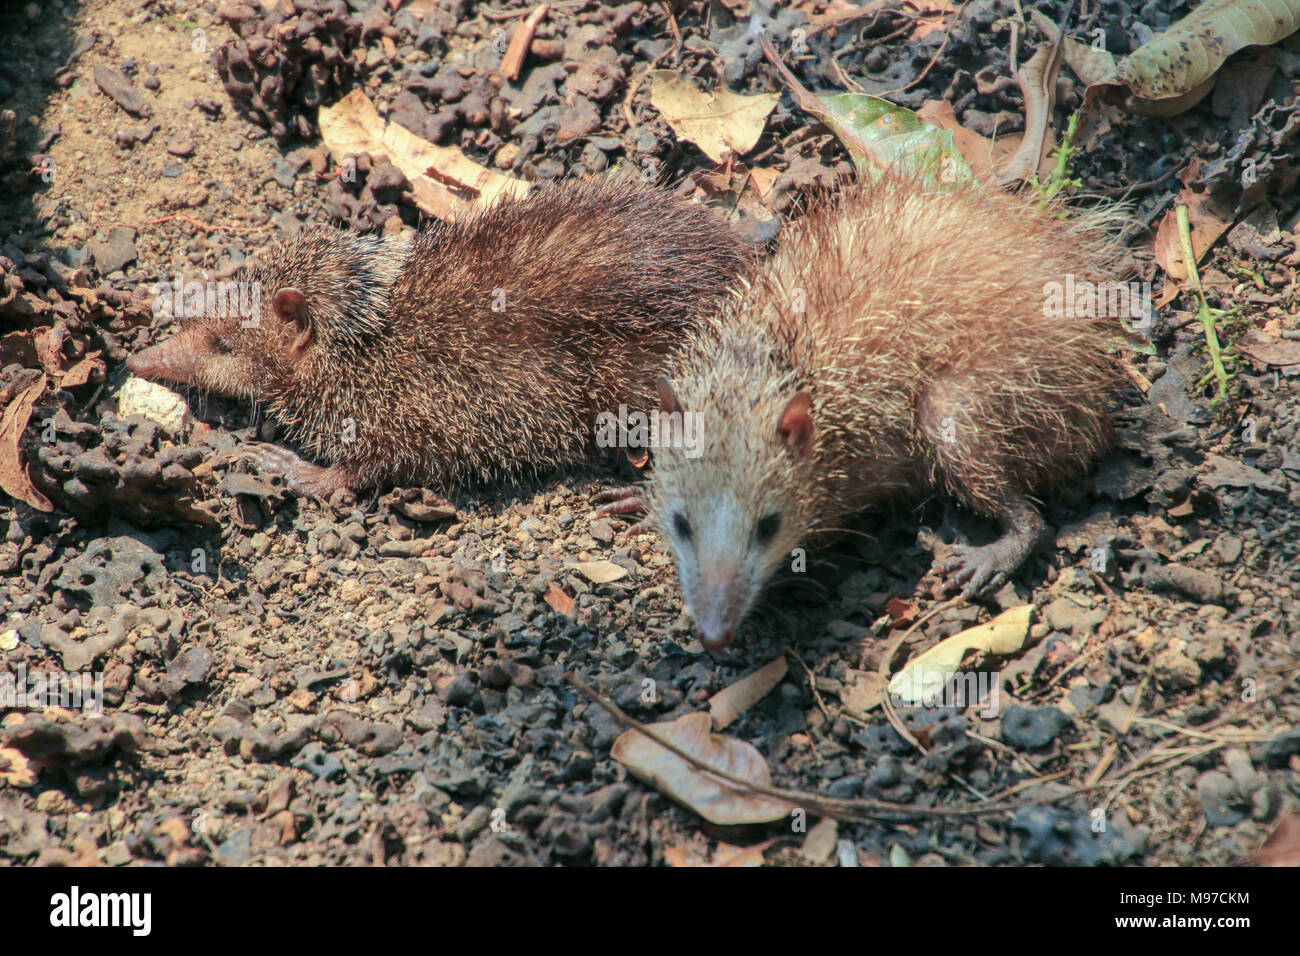 Malagasy giant jumping rat (Hypogeomys antimena). It is omnivorous, but forages on the forest floor mainly for fruit, nuts, seeds, and leaves. It is e Stock Photo